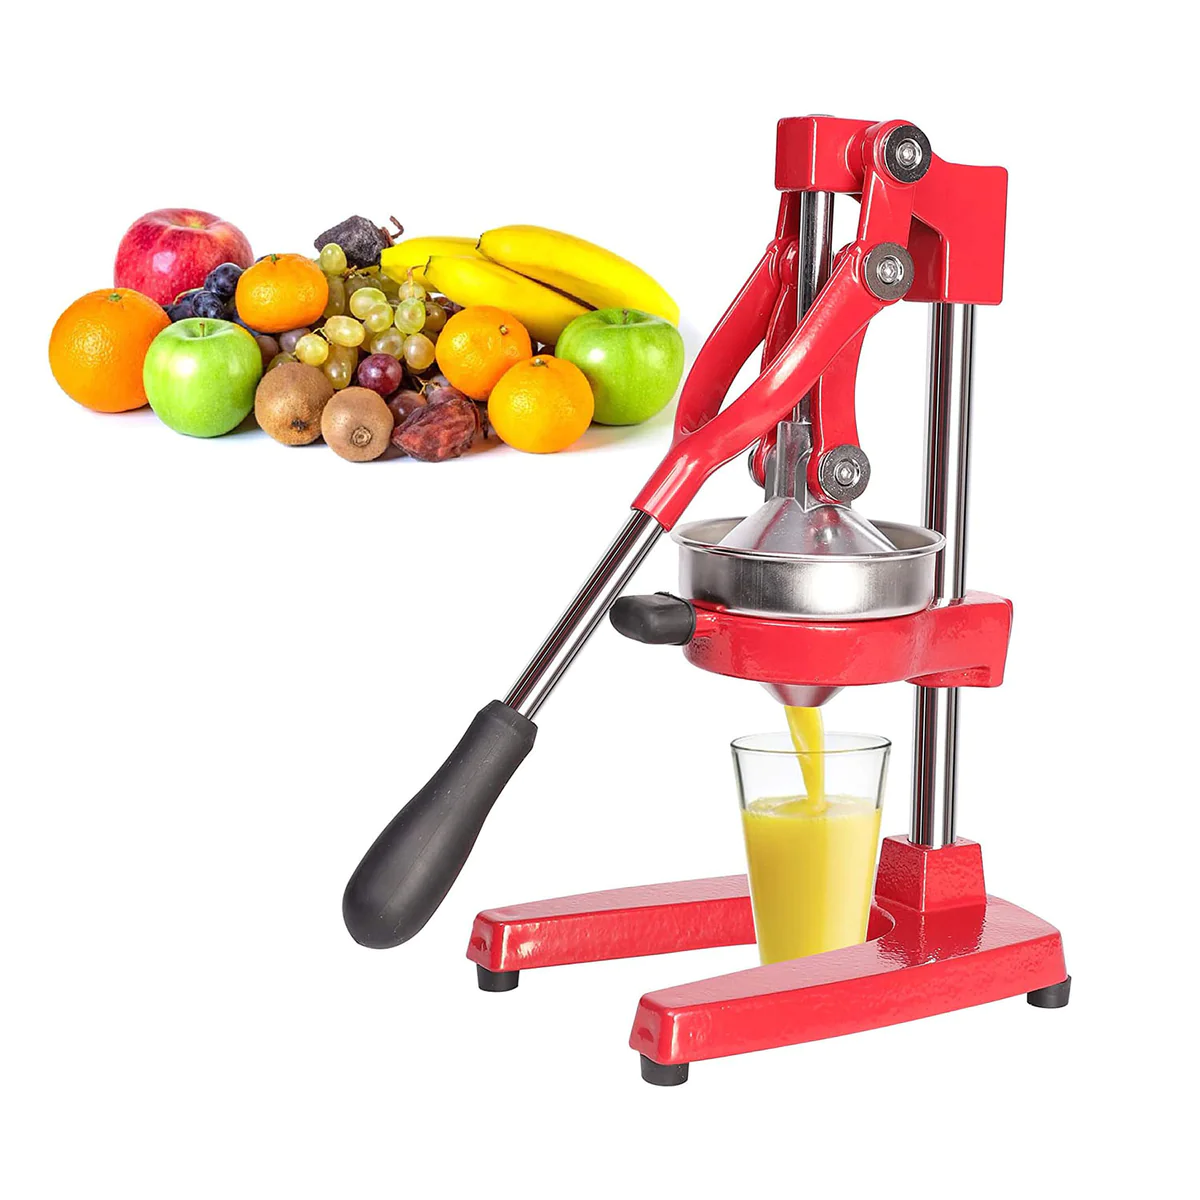 Manual Stainless Steel Citrus Juicer Squeezer with Cast Iron Base and Handle, Red